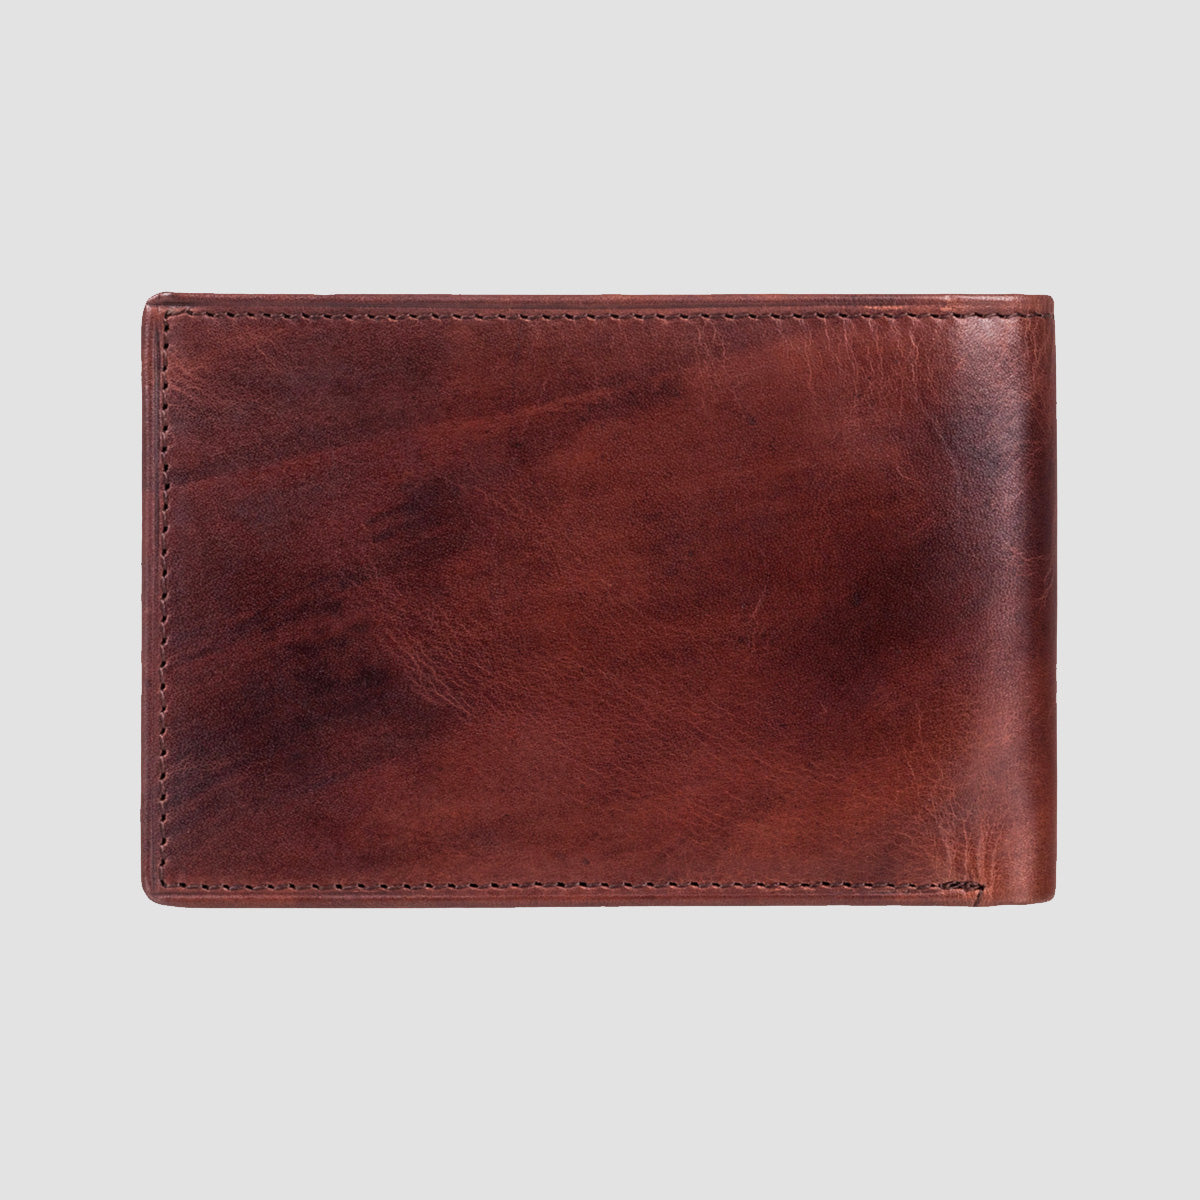 Billabong Arch Leather Wallet Chocolate